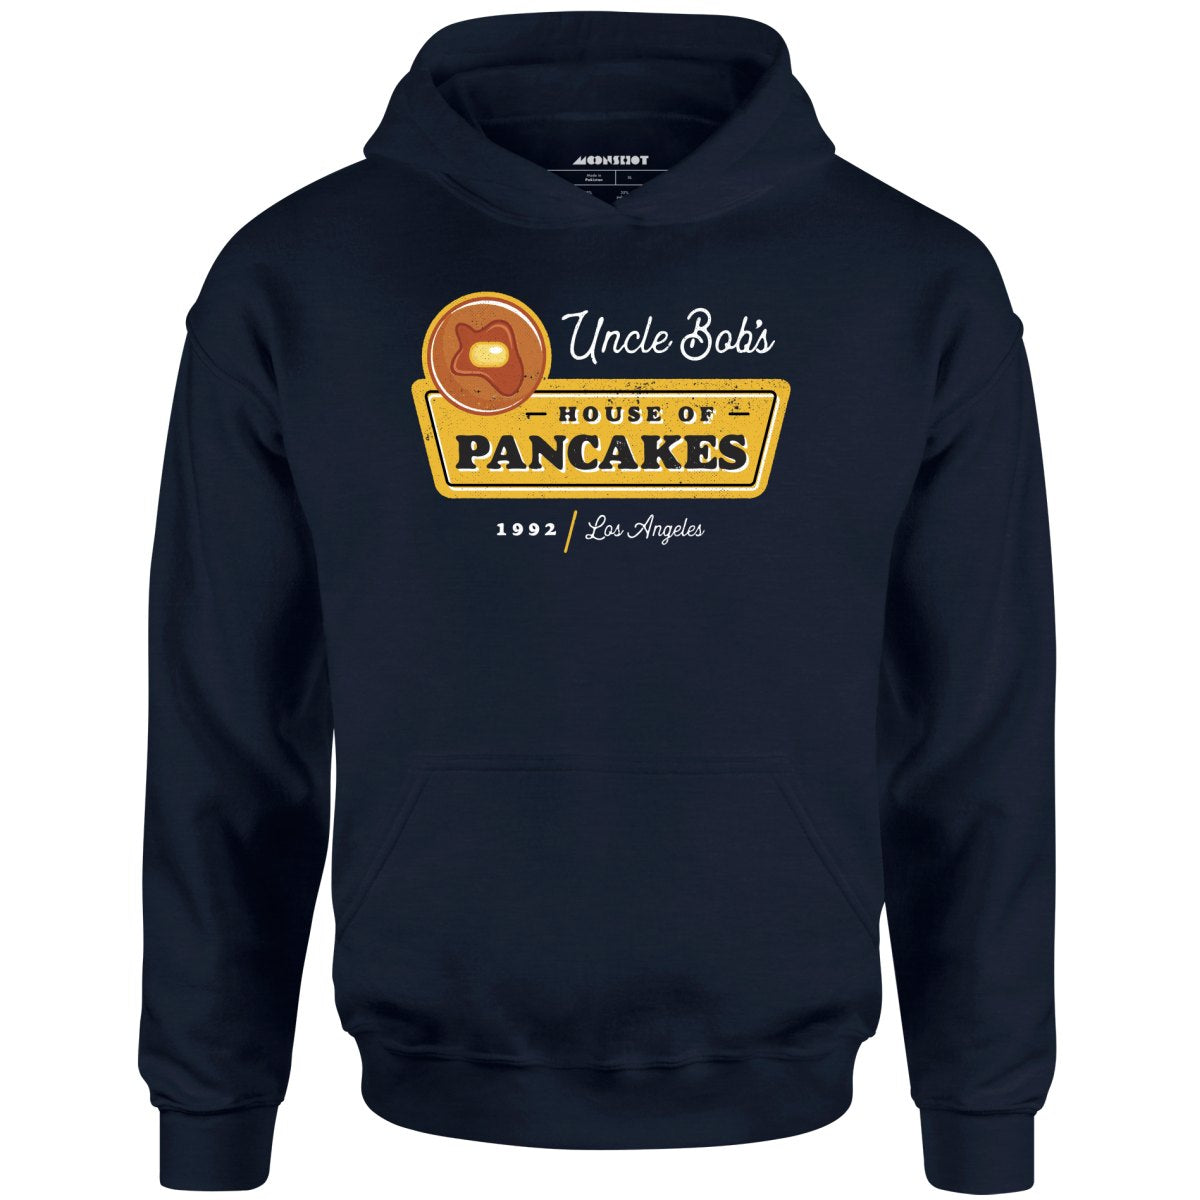 Uncle Bob's House of Pancakes - Reservoir Dogs - Unisex Hoodie